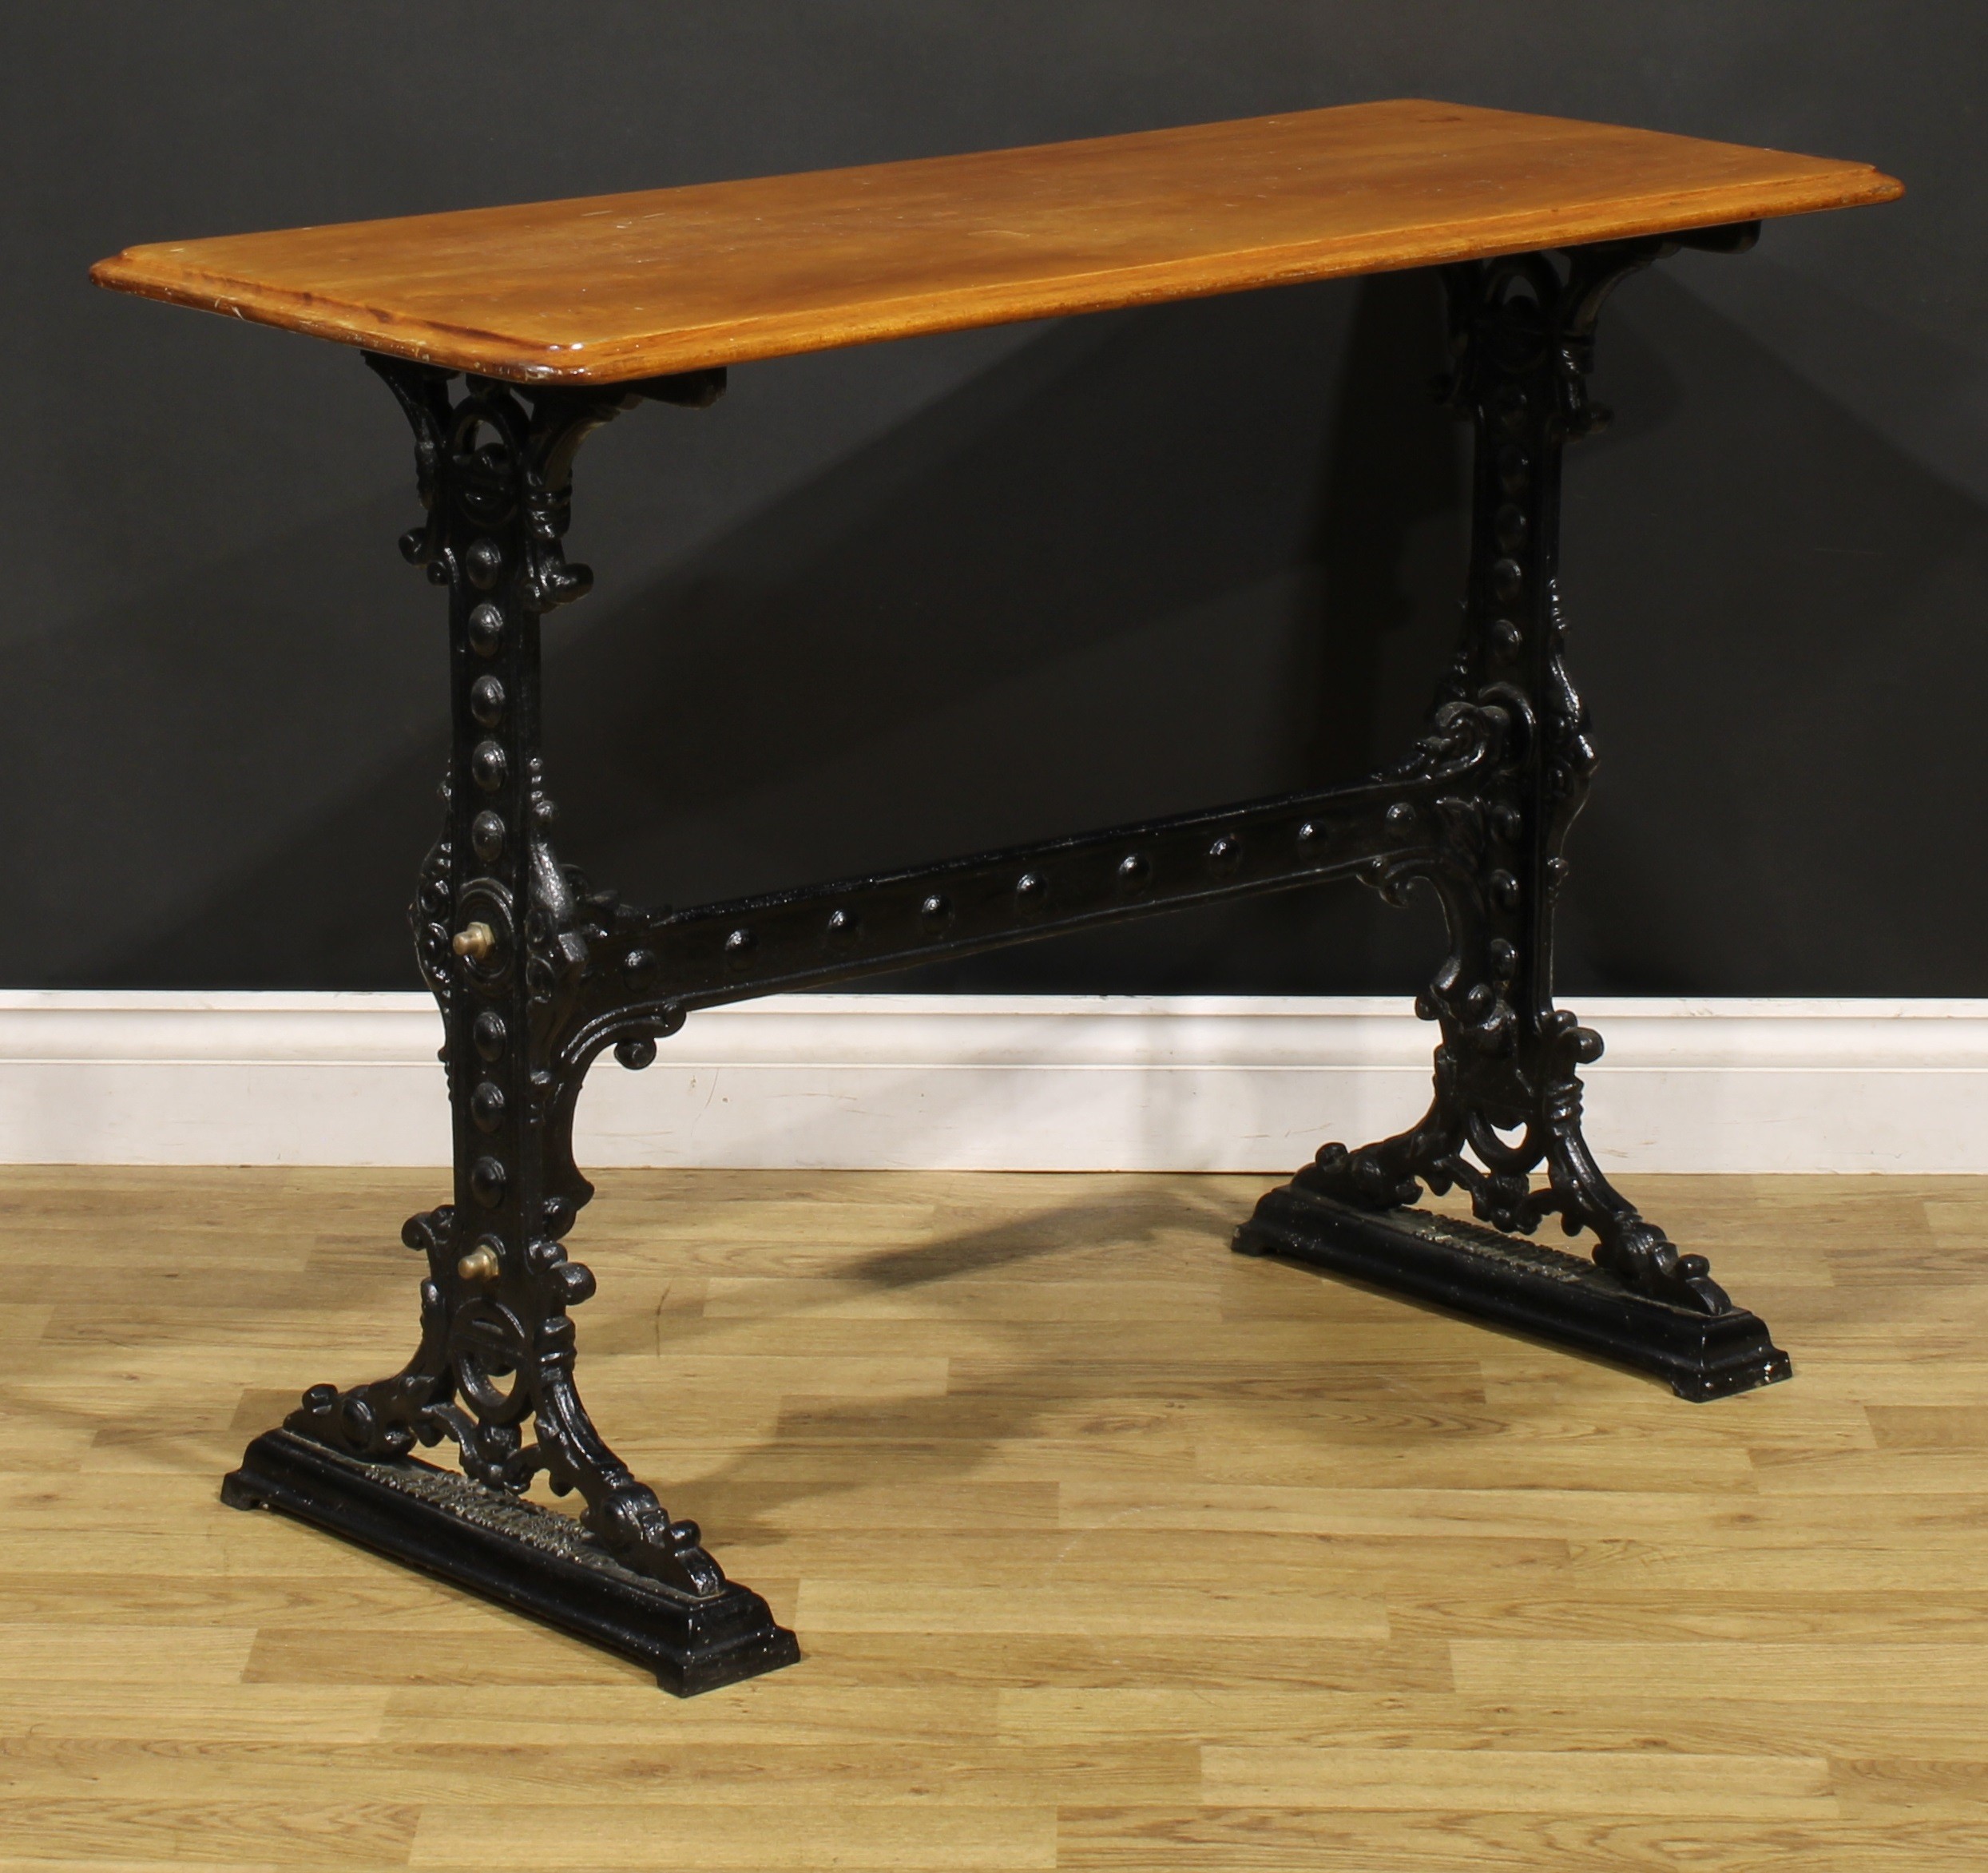 A late 19th century cast iron and mahogany public house or bar table, by Gaskell & Chambers Ltd, - Image 3 of 4